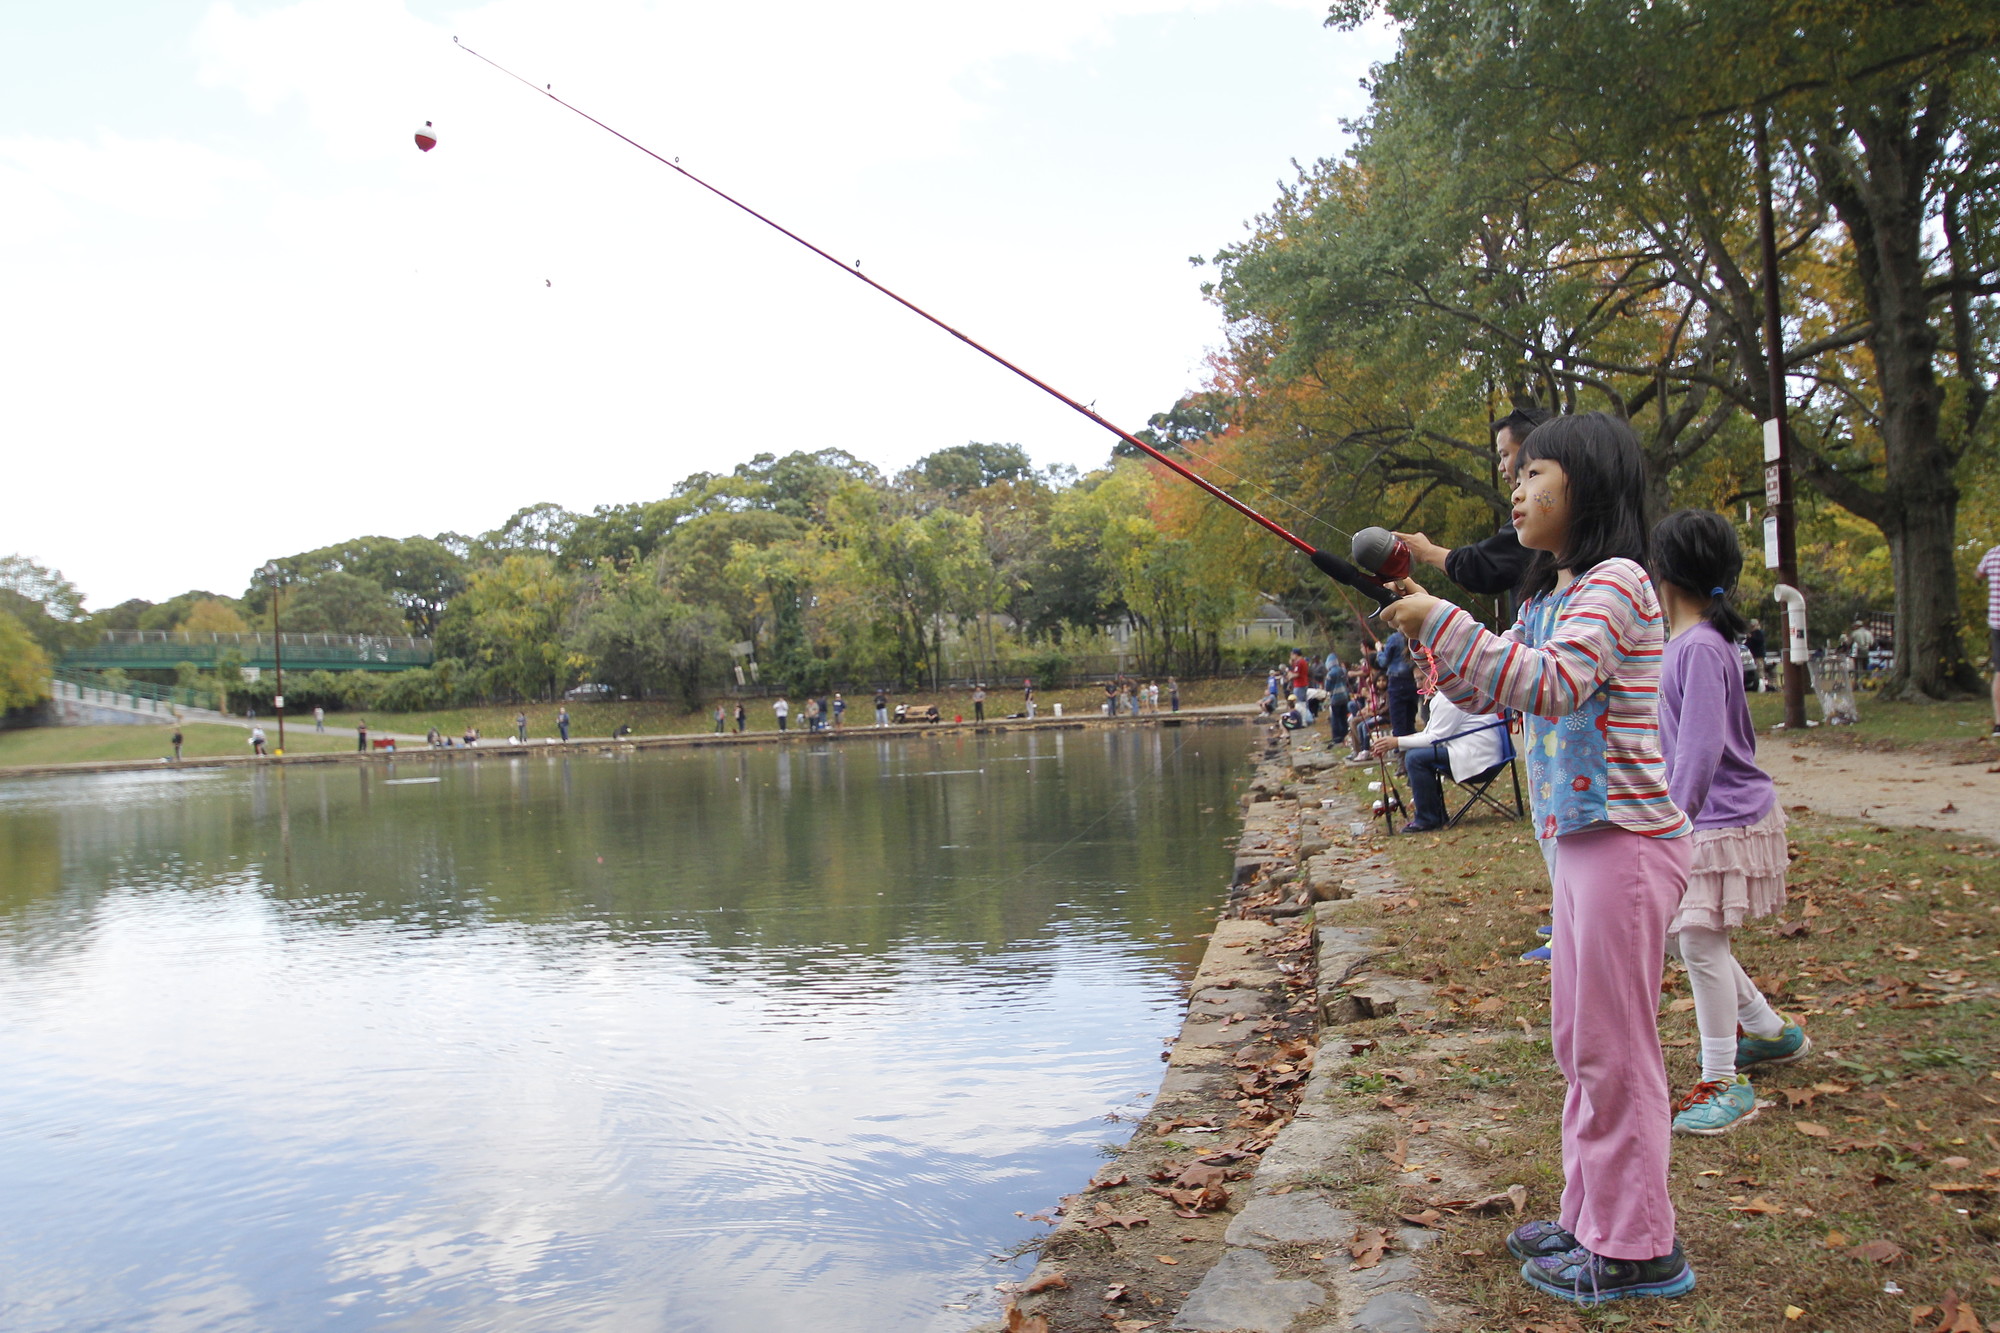 The fishing festival was an opportunity for Kailing Tan to learn how to cast a line.